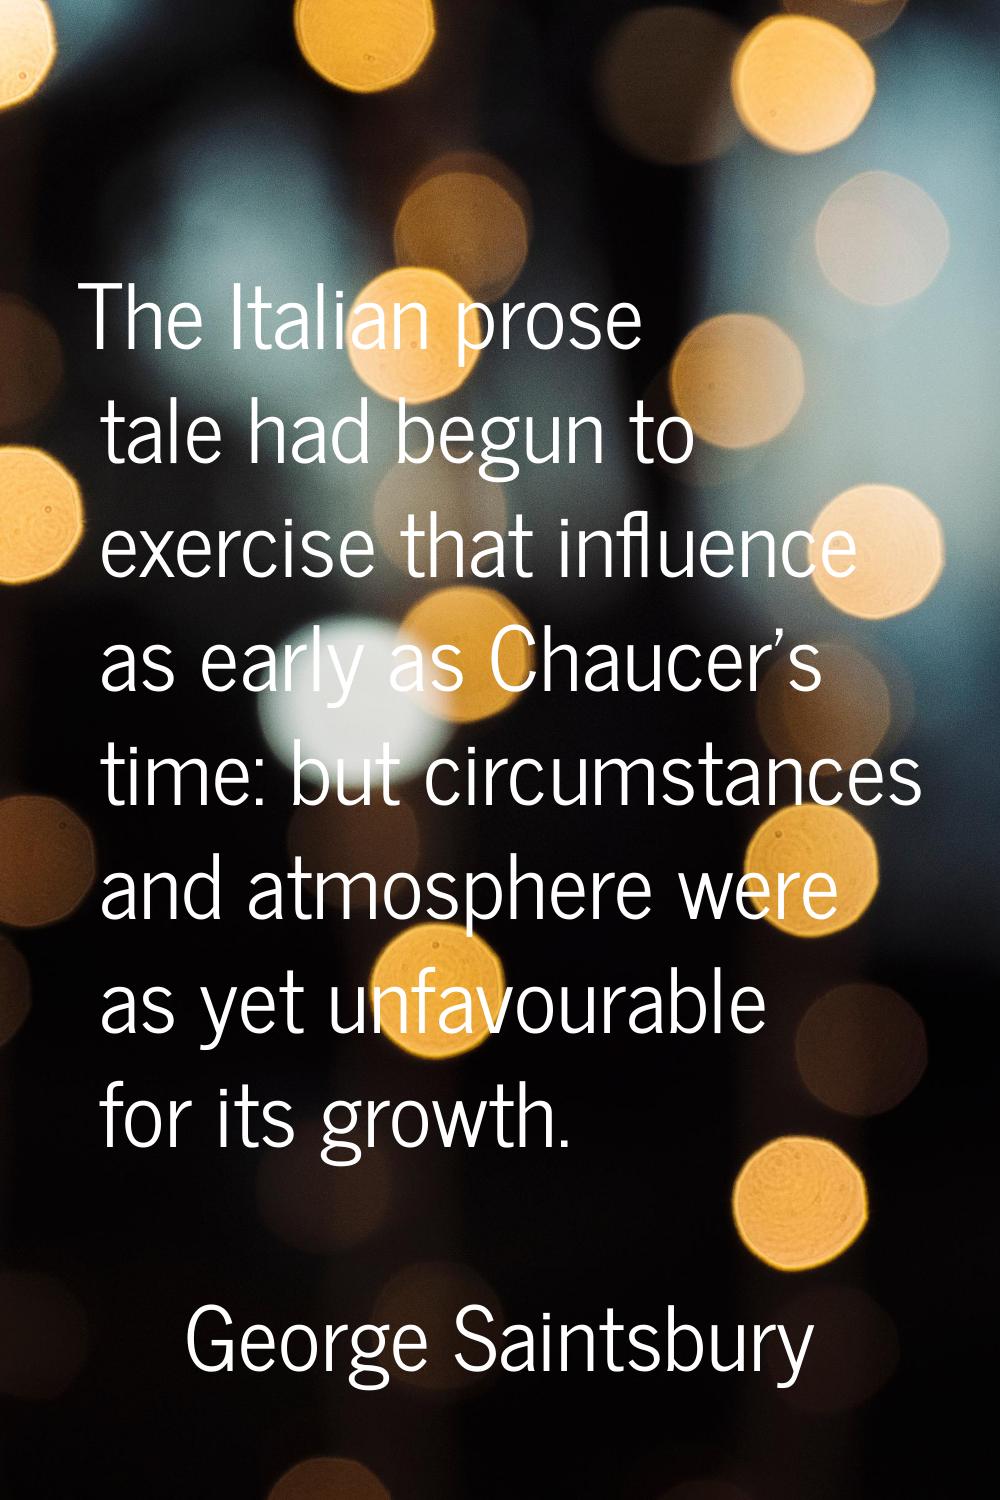 The Italian prose tale had begun to exercise that influence as early as Chaucer's time: but circums